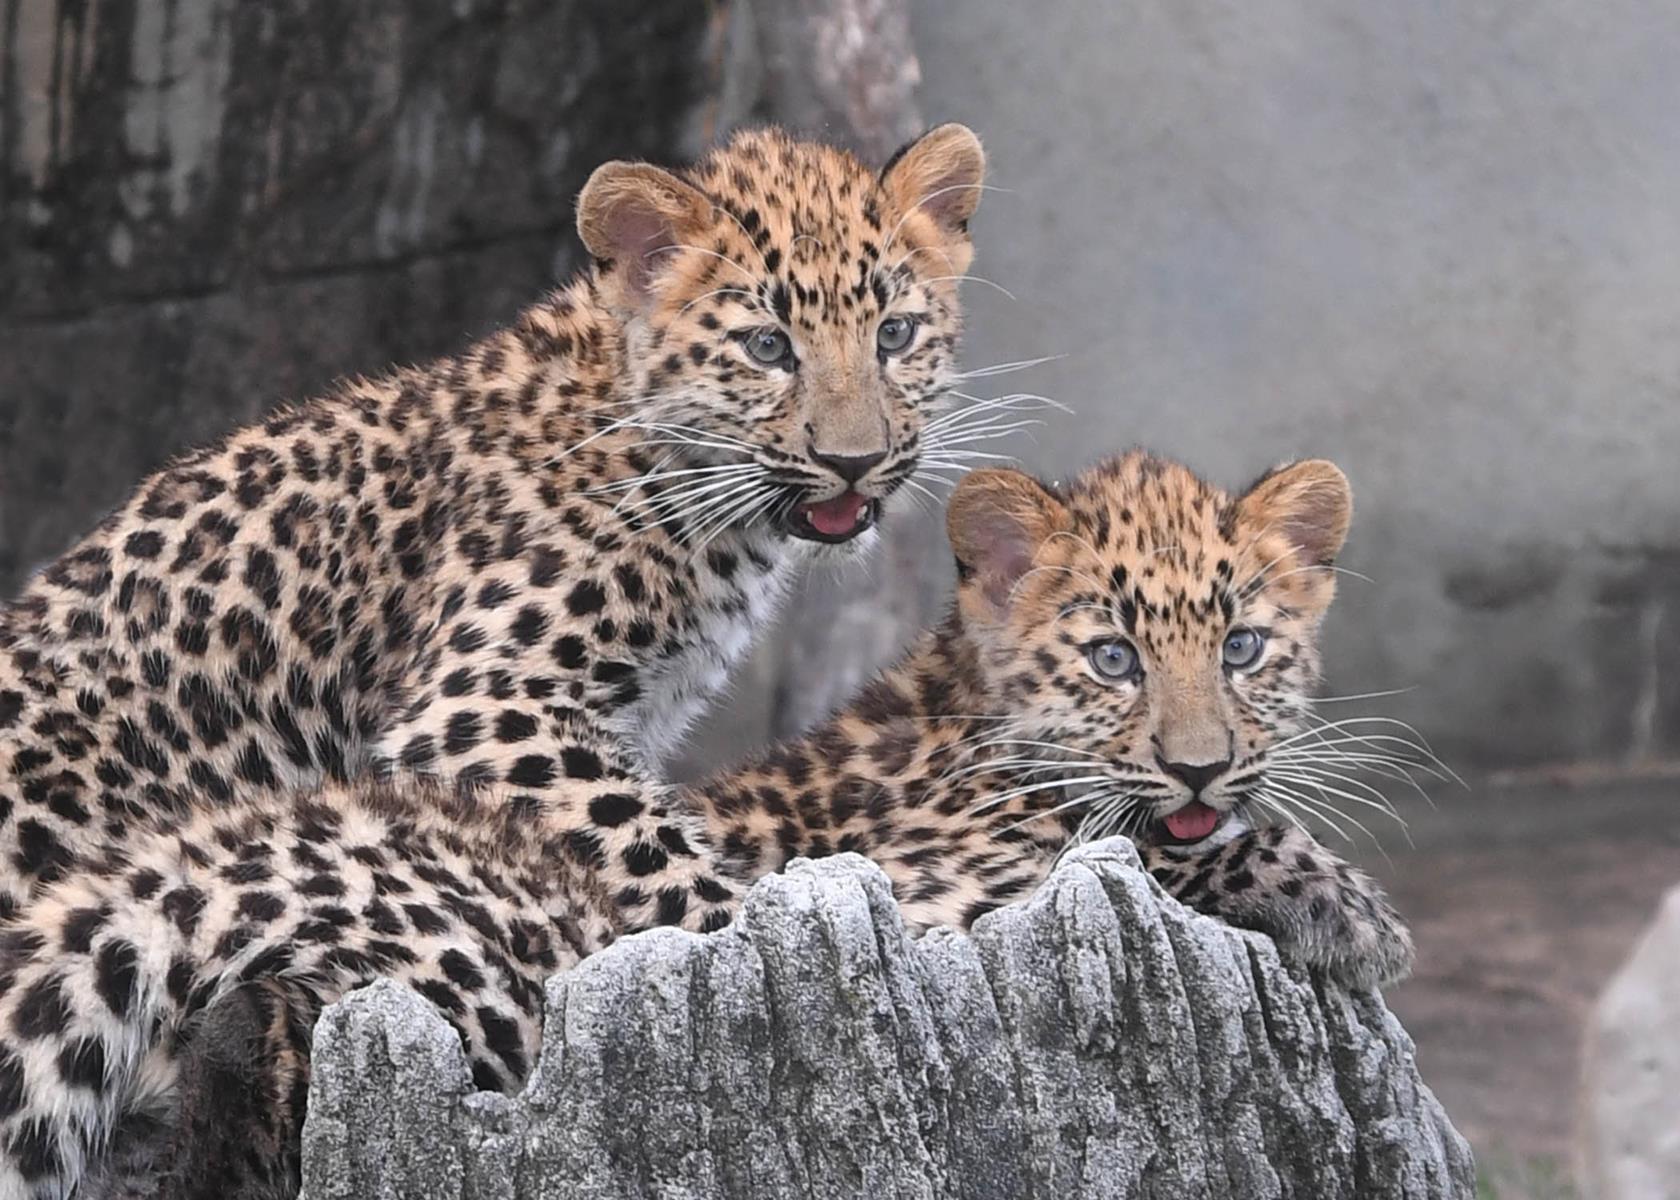 2120: Amur leopard cubs born in April 2018 can be seen in their outdoor habitat at Brookfield Zoo. Photo: Chicago Zoological Society.